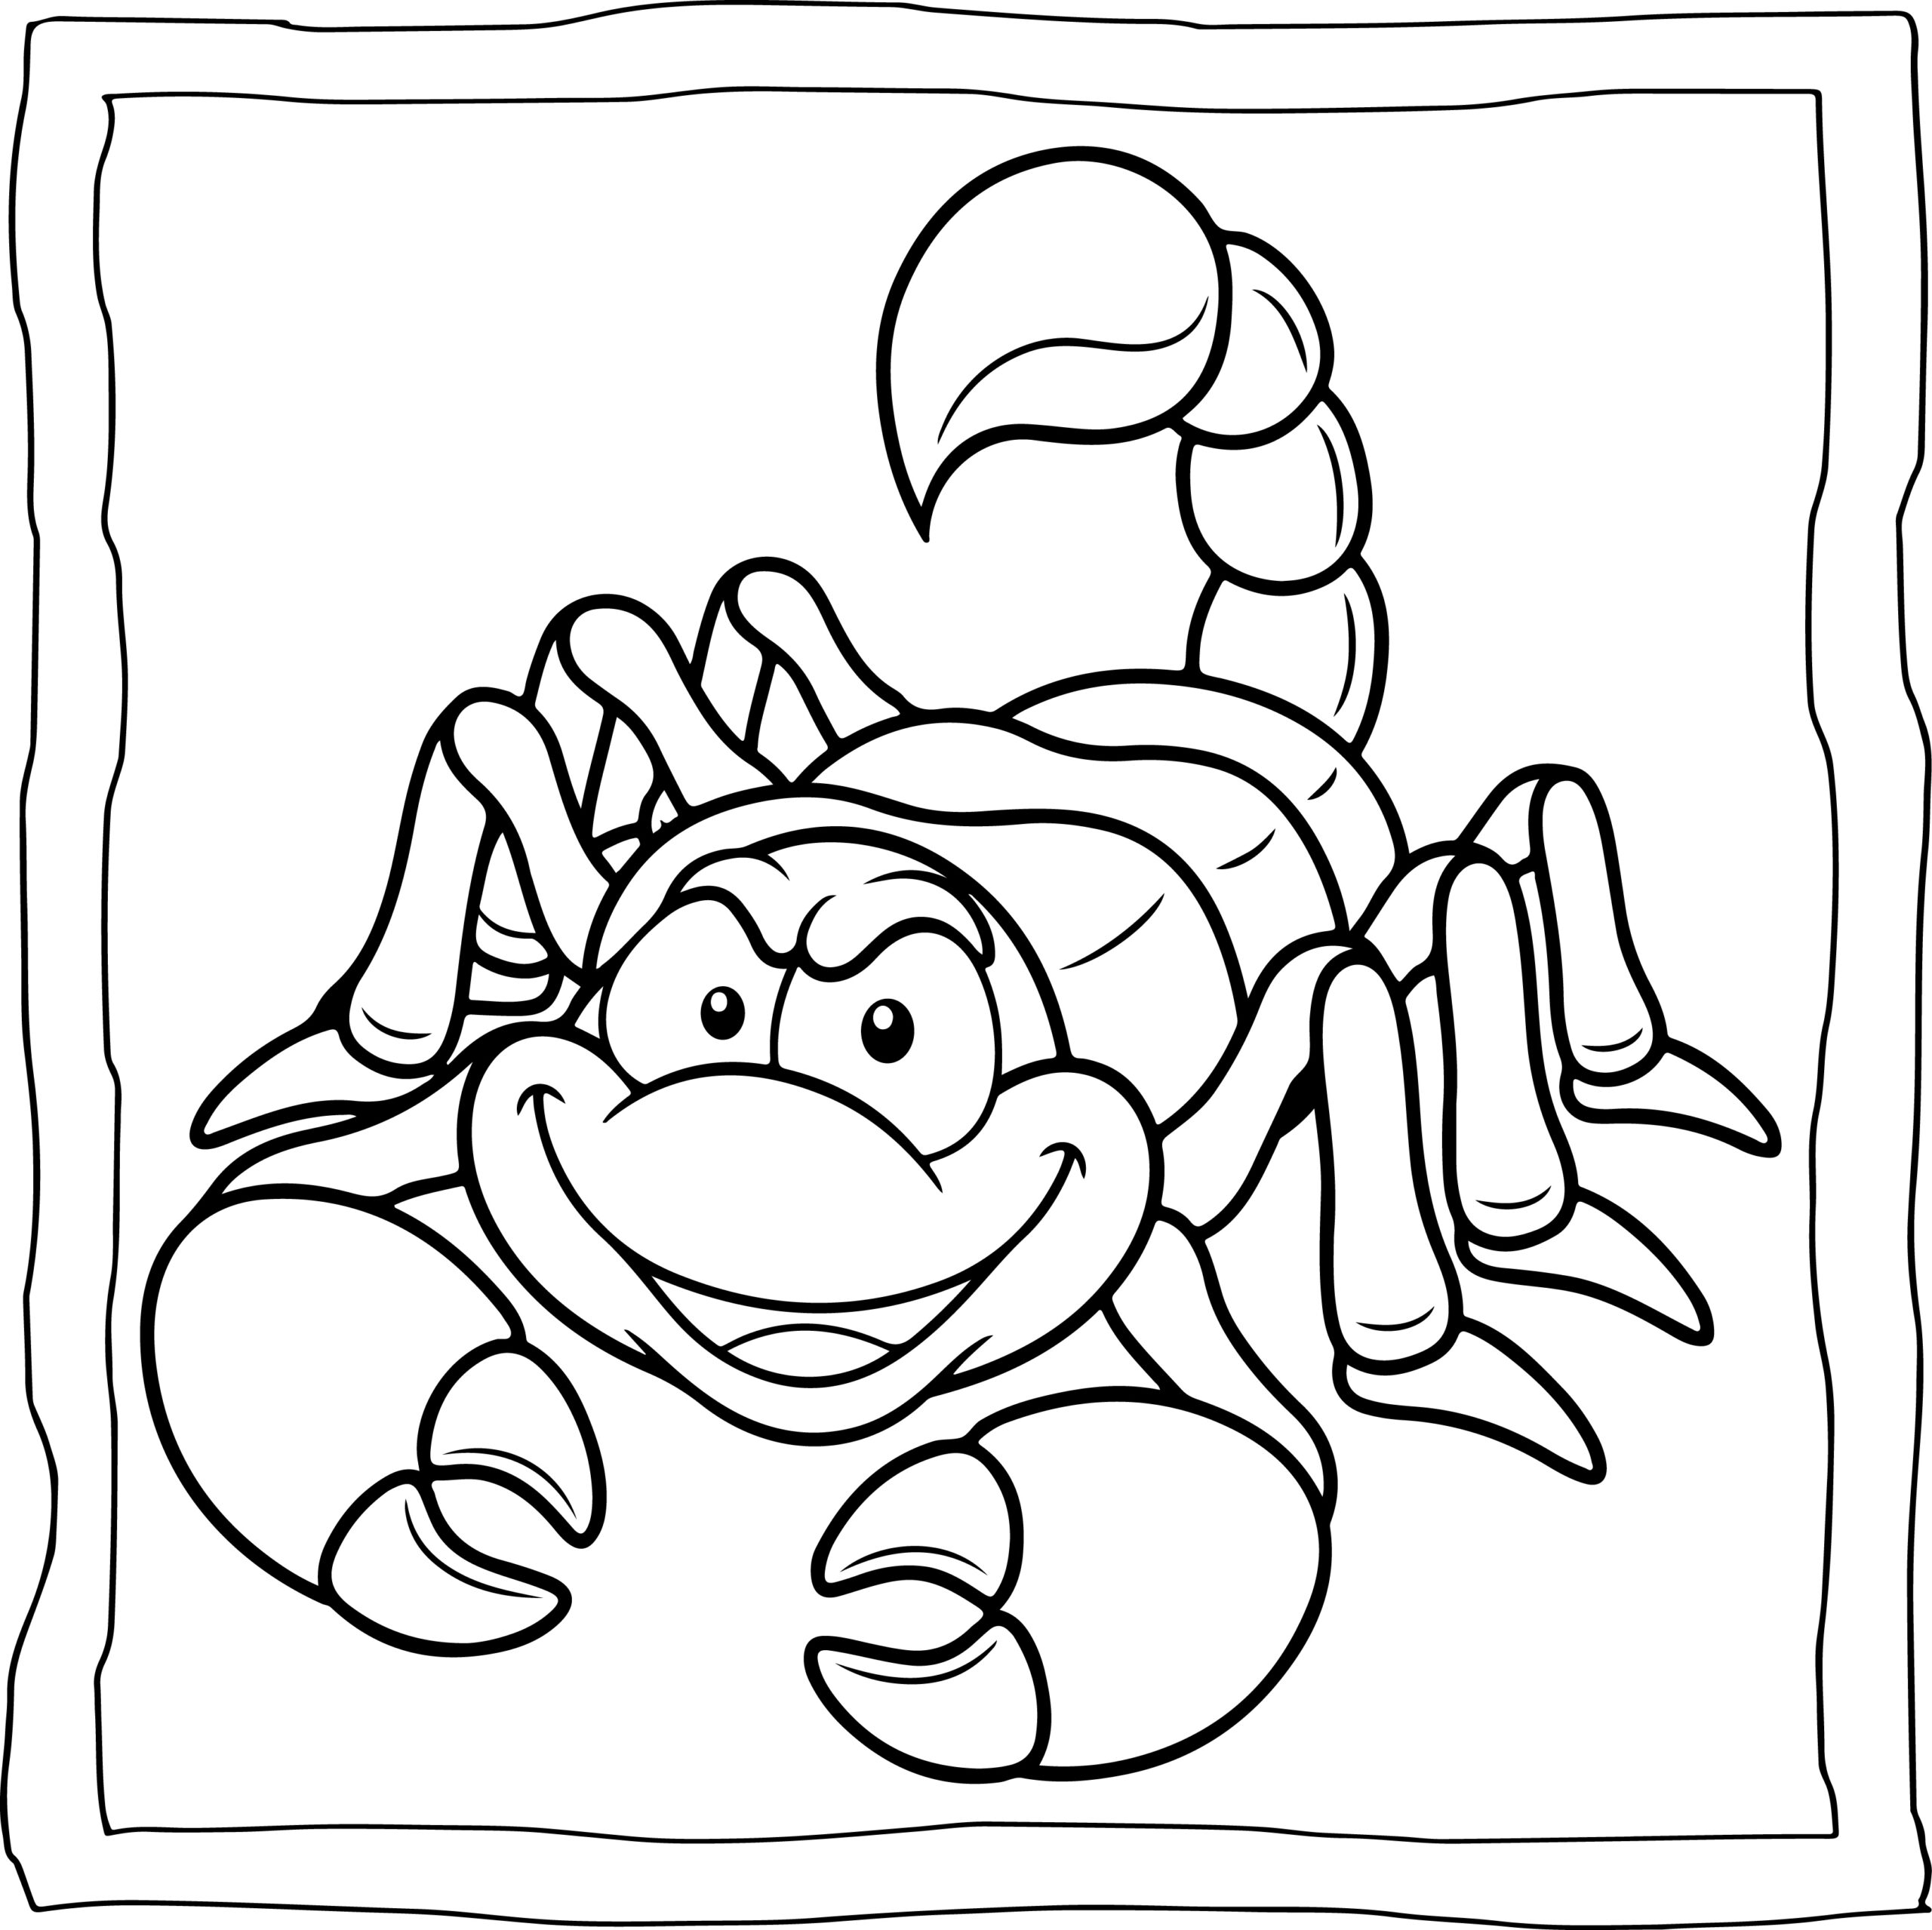 Scorpion coloring book easy and fun scorpions coloring pages for kids made by teachers